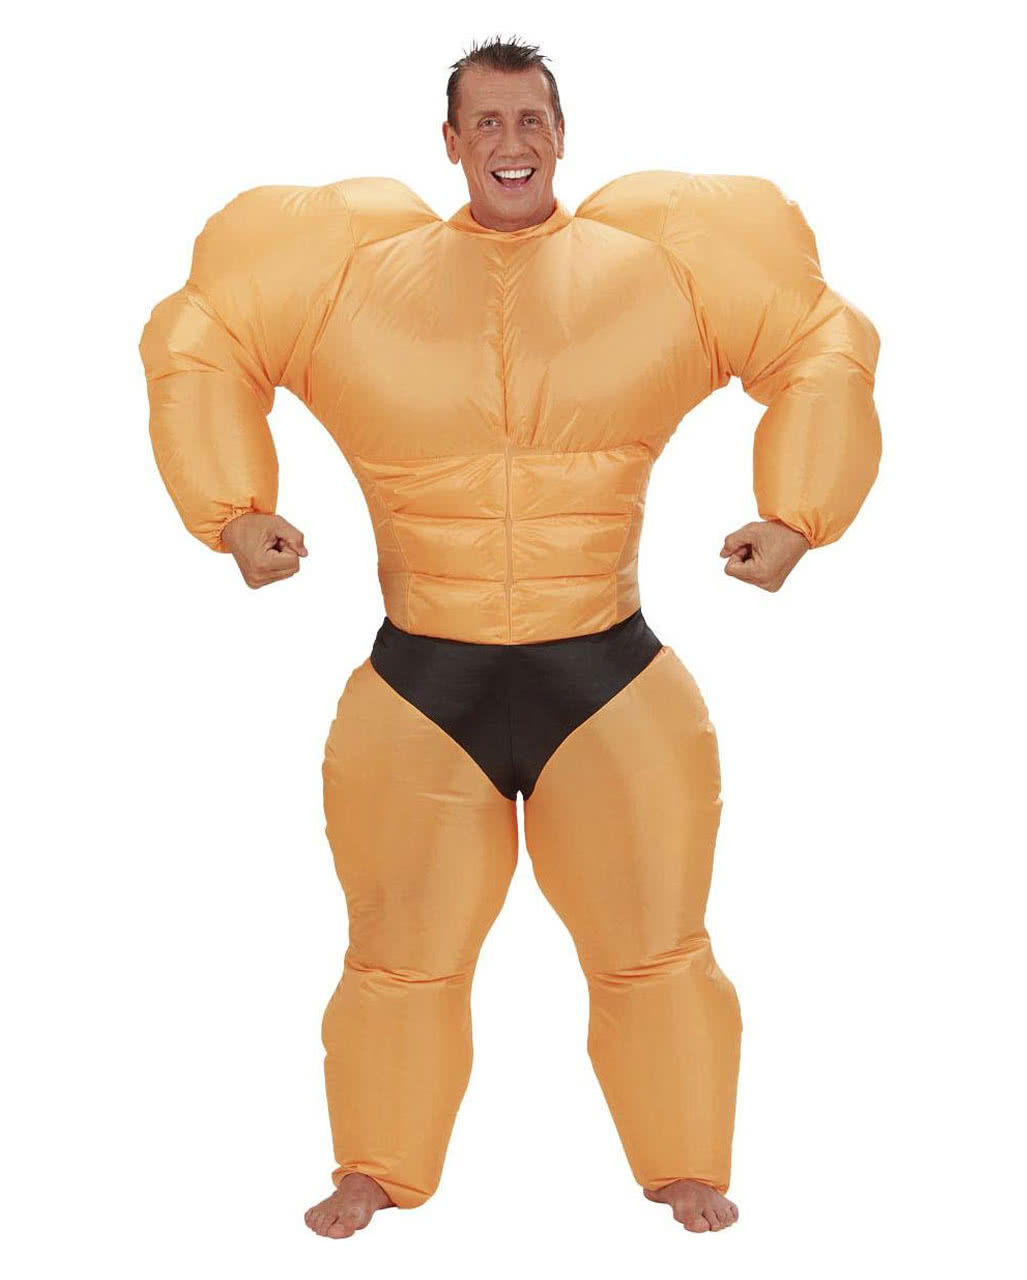 Kids Childrens Inflatable Bodybuilder Muscle Man Fancy Dress Costume Hallow...